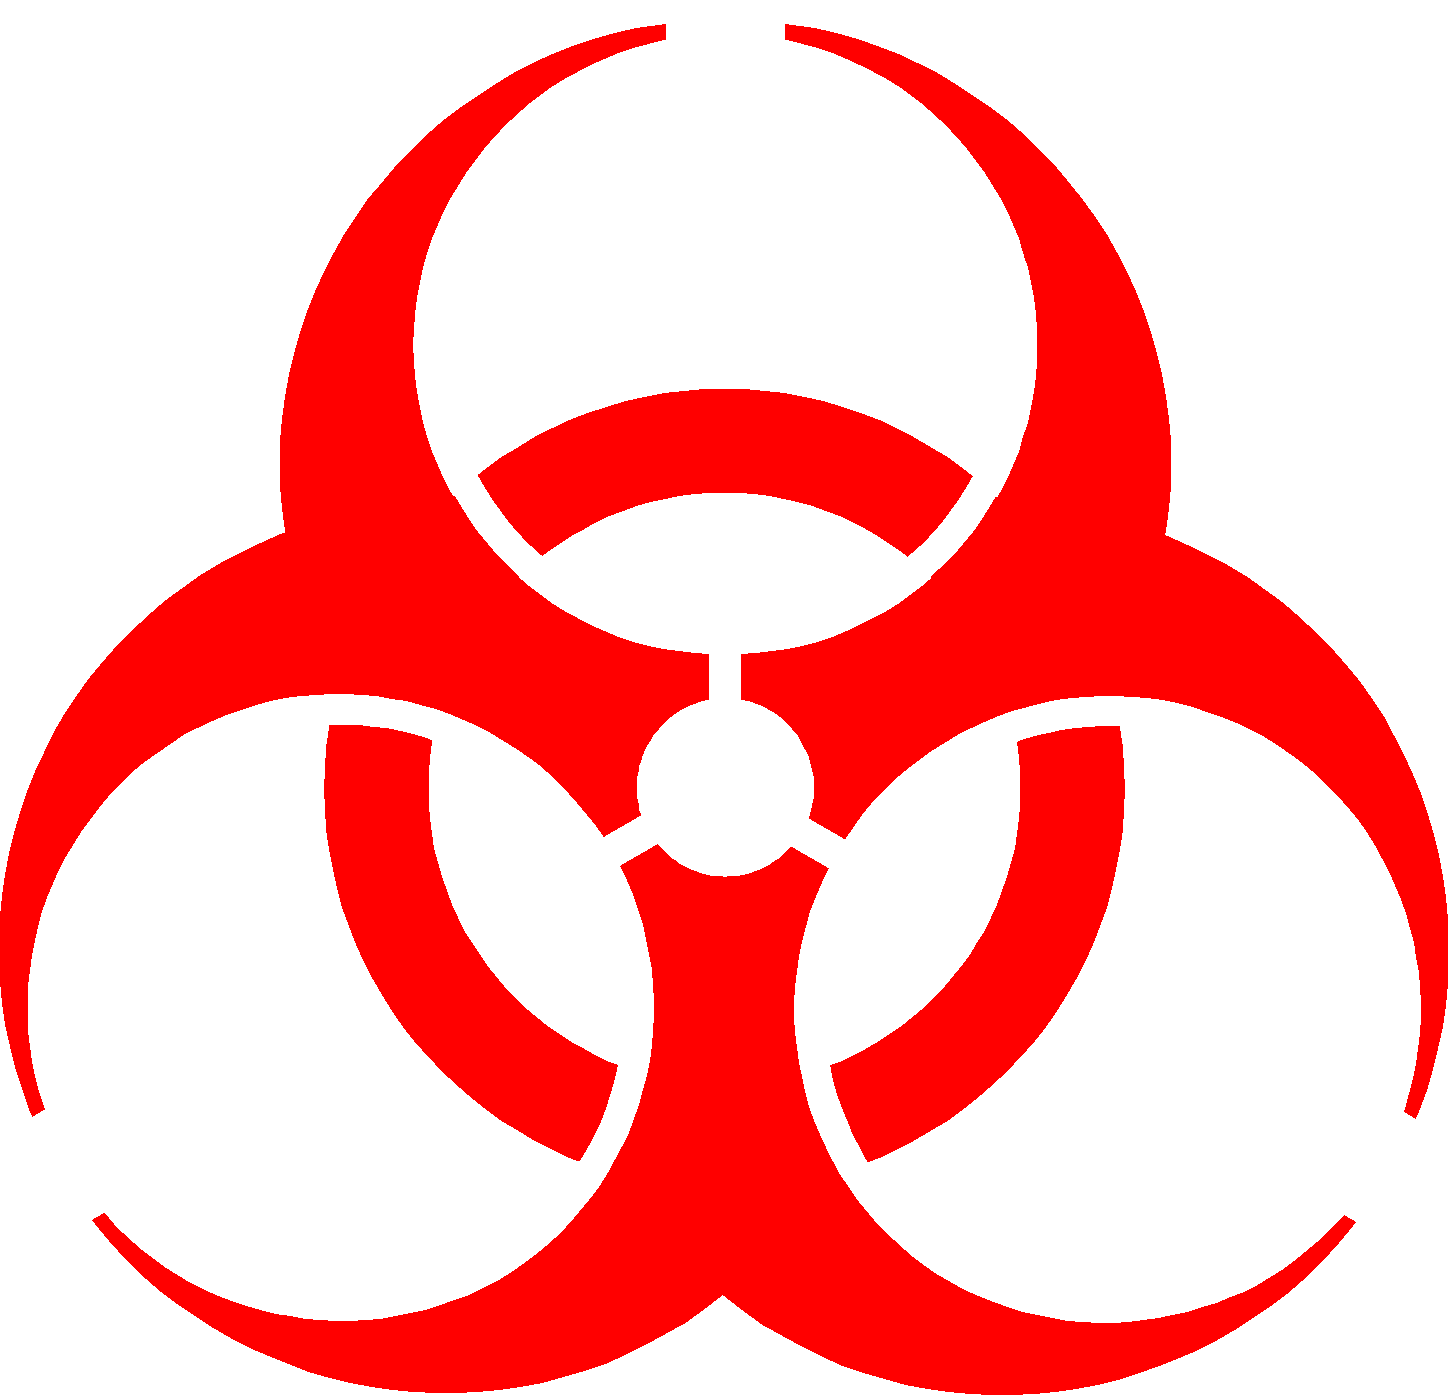 Biohazard Symbol They Are More Commonly Used In Emergency ...